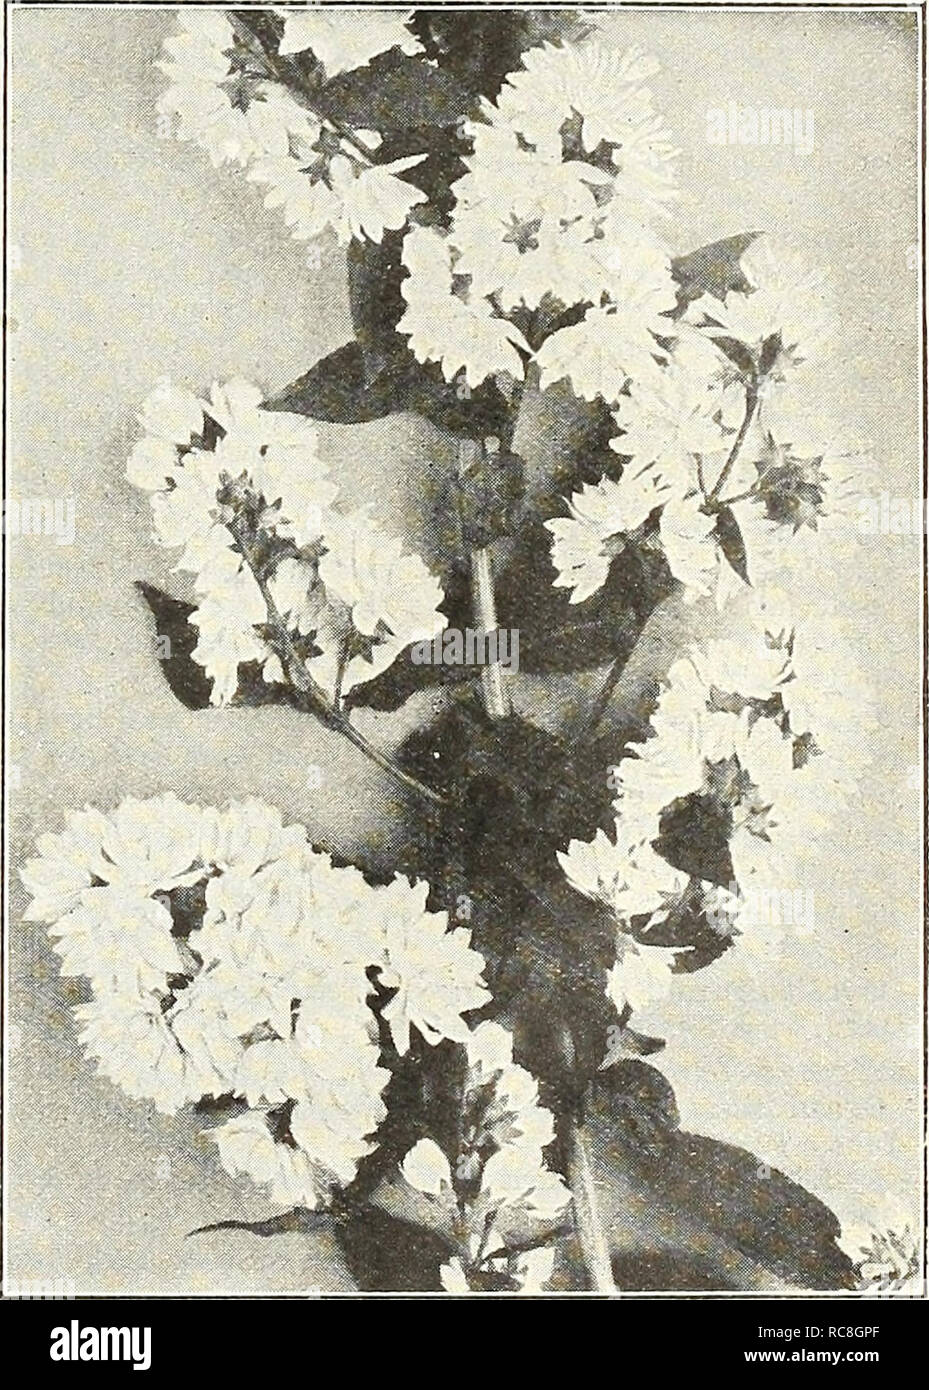 . Dreer's garden book 1928. Seeds Catalogs; Nursery stock Catalogs; Gardening Equipment and supplies Catalogs; Flowers Seeds Catalogs; Vegetables Seeds Catalogs; Fruit Seeds Catalogs. Euonymus Alata (Corkbark). A shrub different in character from others, having an individuality of its own. It is particu- larly ornamental and interesting on account of its curious corky bark. The small flowers of the spring are followed by attrac- tive red berries in the fall. It is also valuable on account of its bright scarlet autumn foliage which makes it very conspicuous in the fall. Strong plants, $1.00 eac Stock Photo